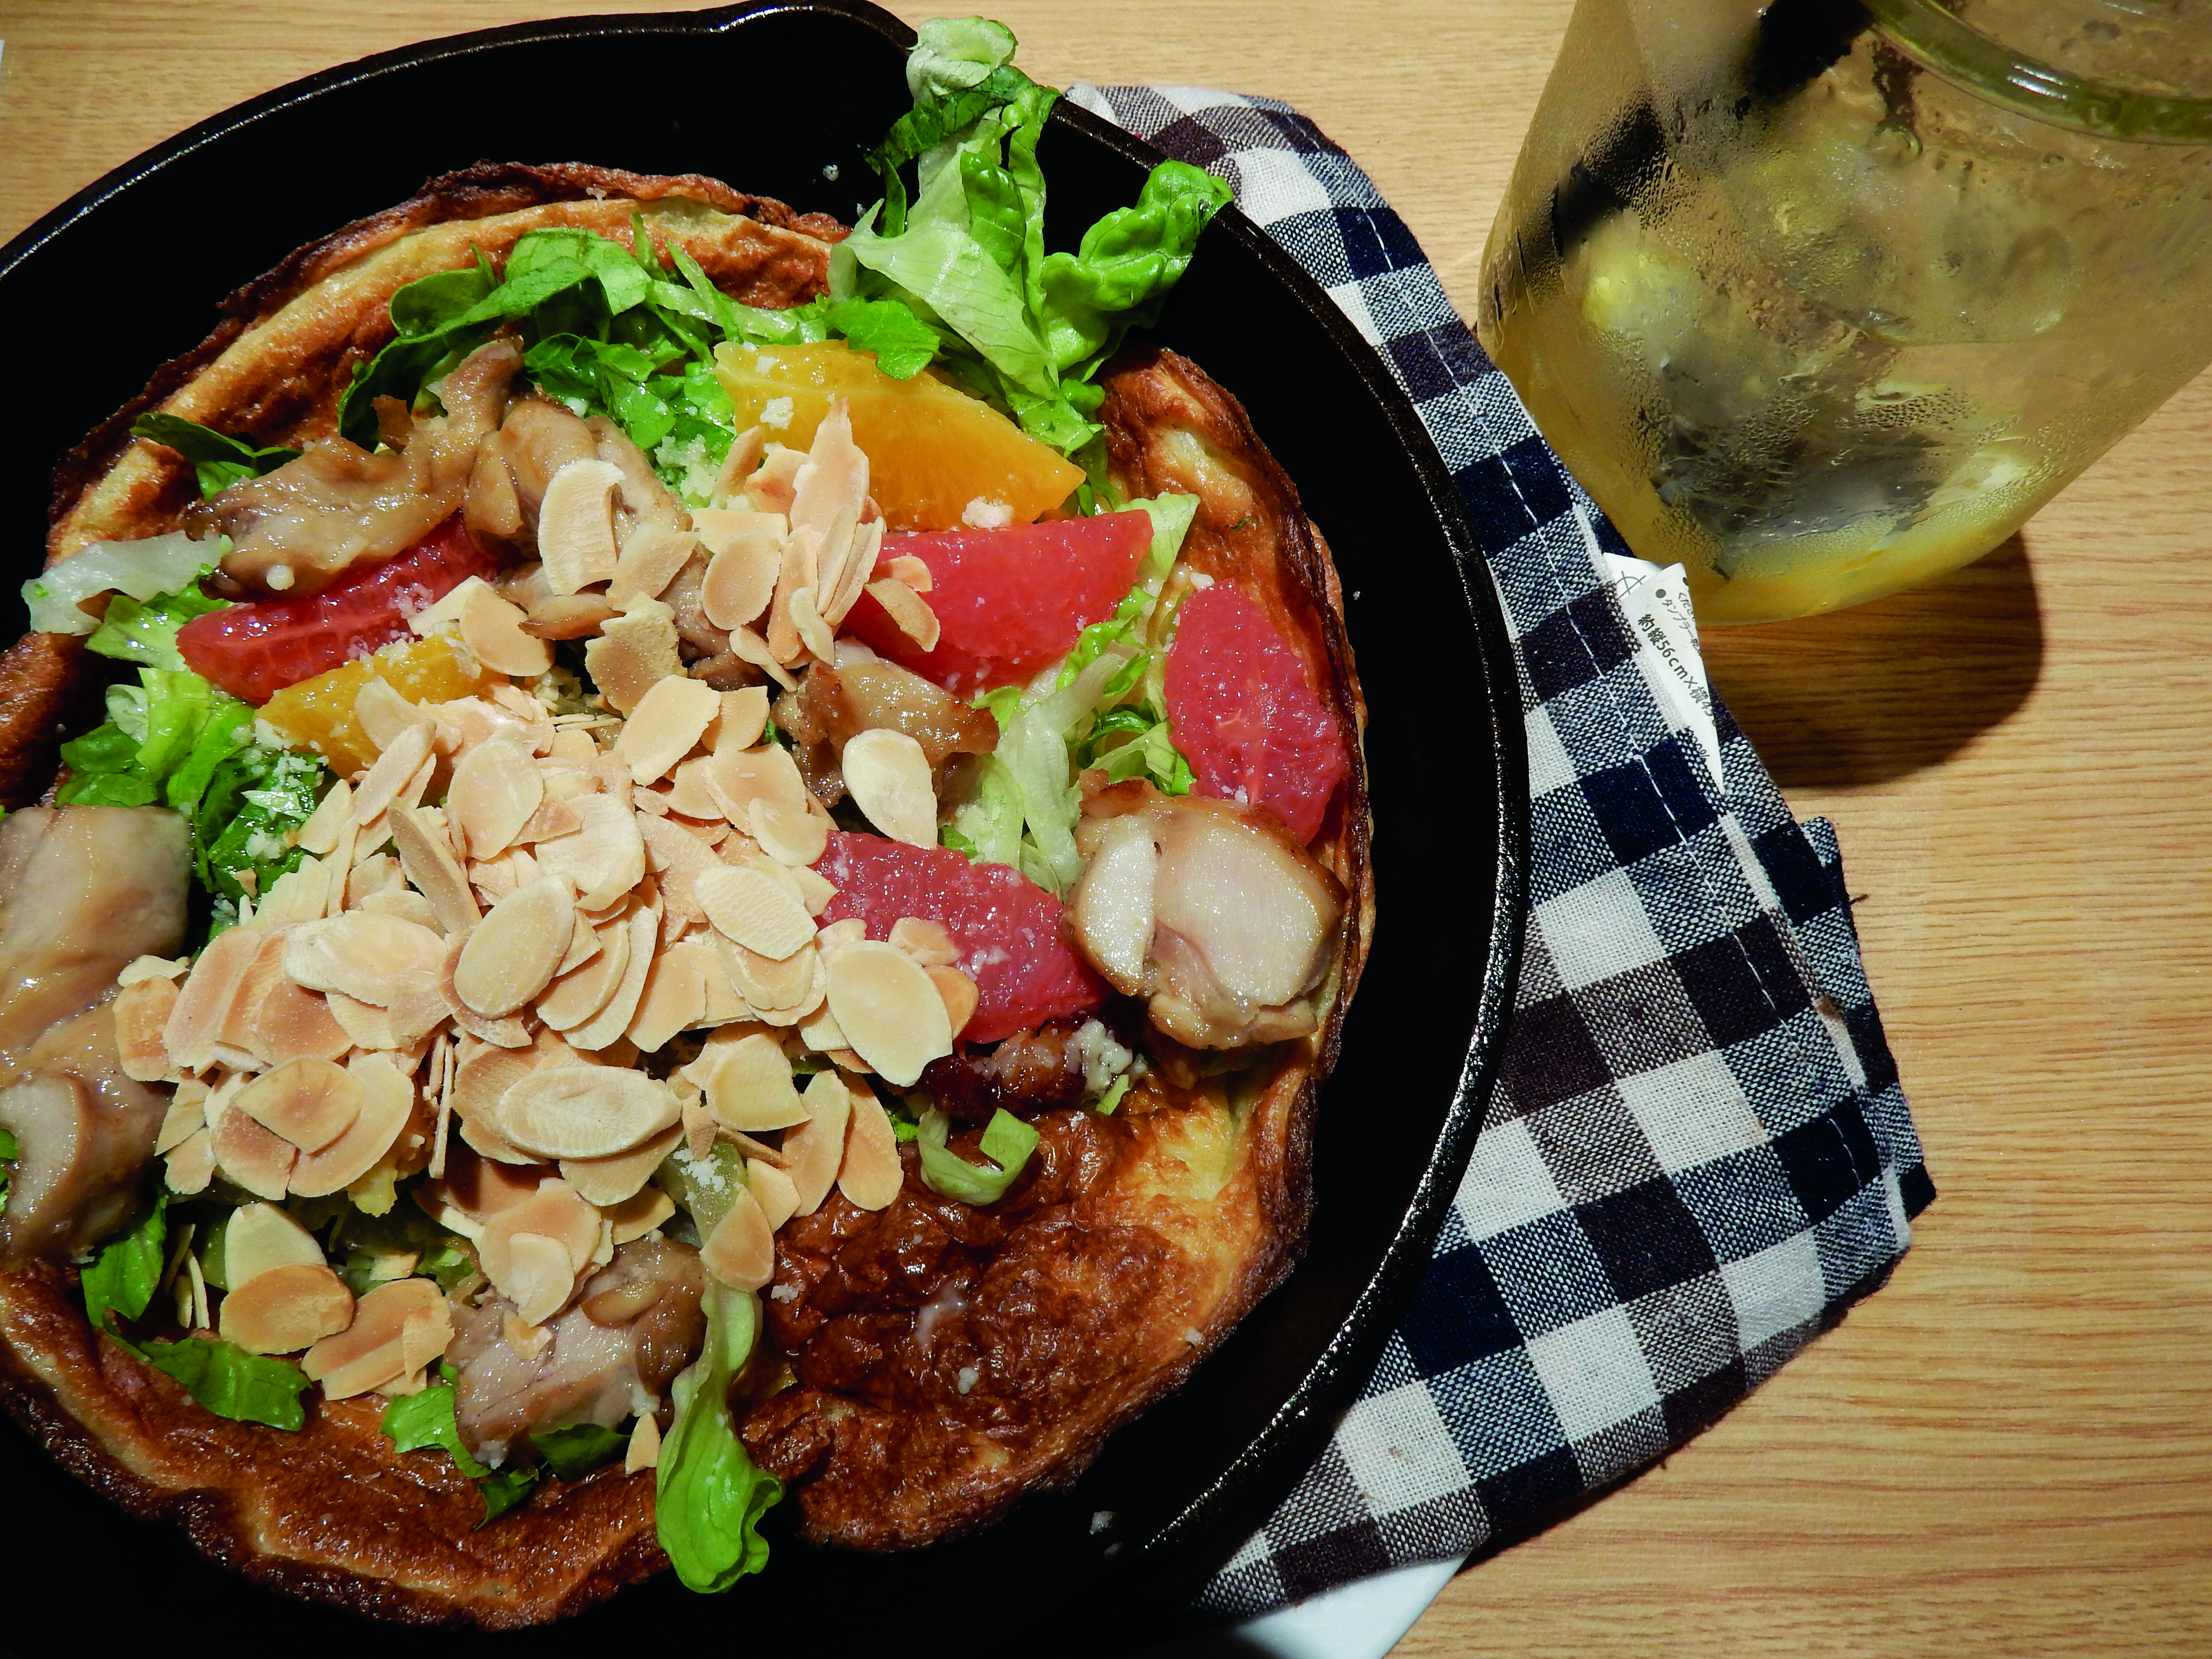 THE PHOTOGENIC PANCAKE: Although the taste of the pancake is too sweet, the presentation alone at the Dutch Baby Café is enough to attract you back for more. (Photo: See Zhuhui, Hannah)